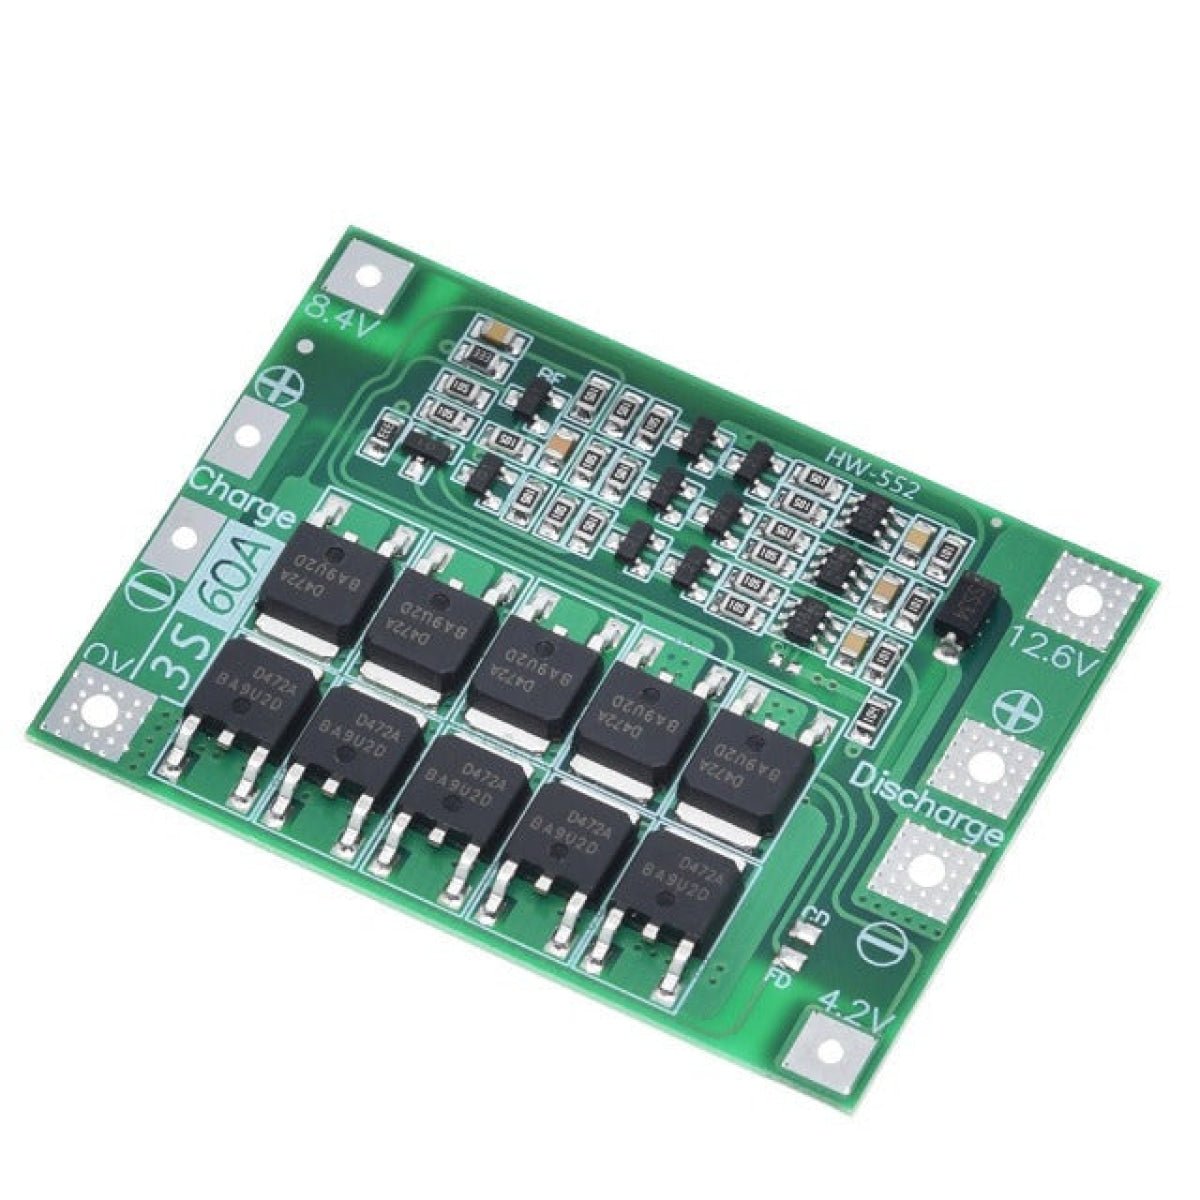 1pcs or Set 3S 4S 40A 60A Li-ion Lithium Battery Charger Protection Board 18650 BMS For Drill Motor Enhance Balance 11.1V 12.6V/14.8V 16.8V - 3S 60A Enhance - - Asia Sell